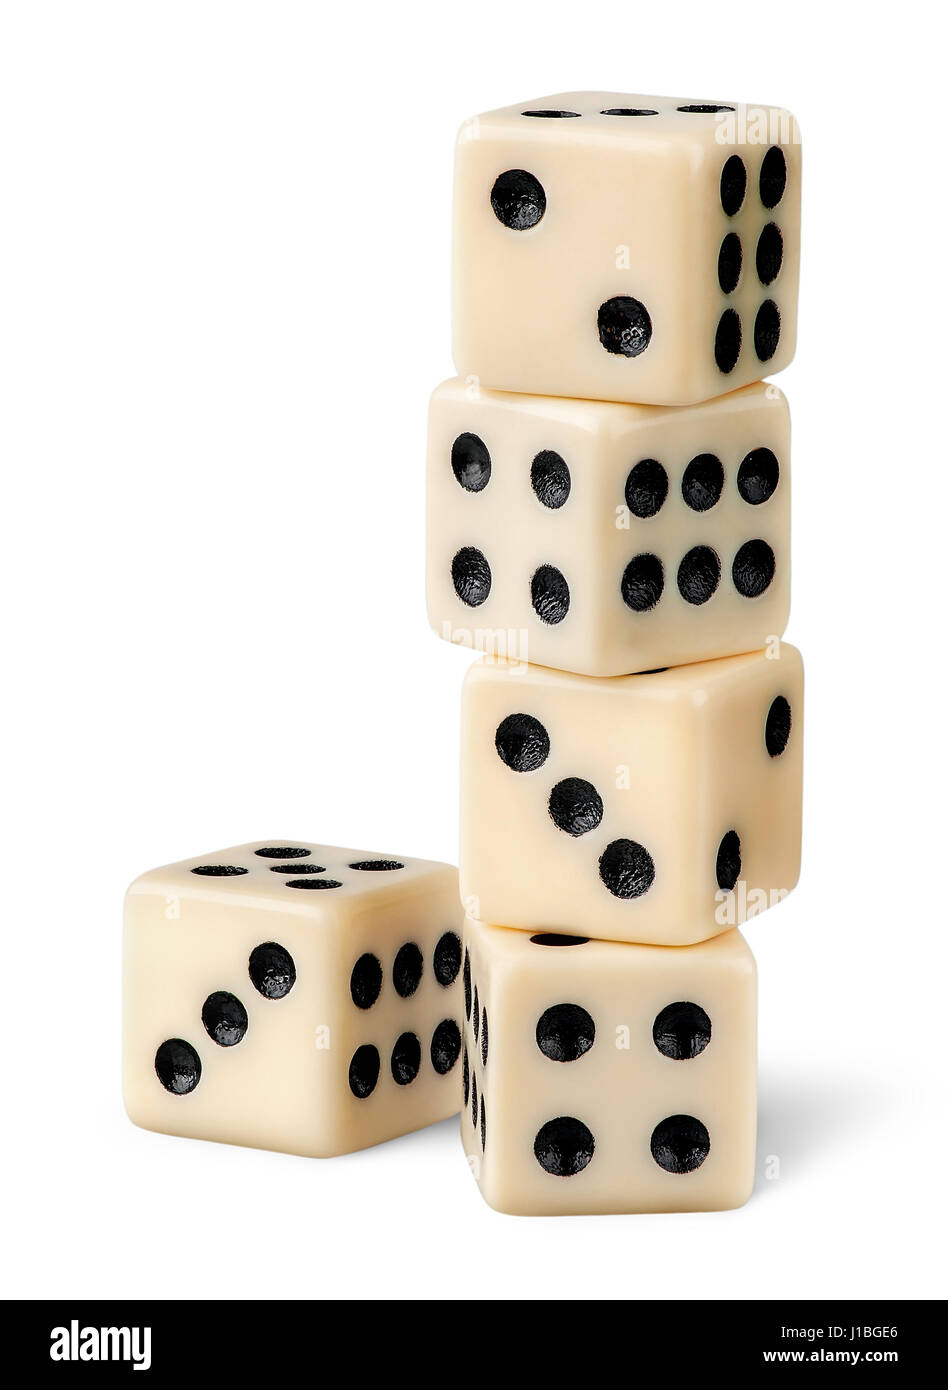 Stack of gaming dice Stock Photo